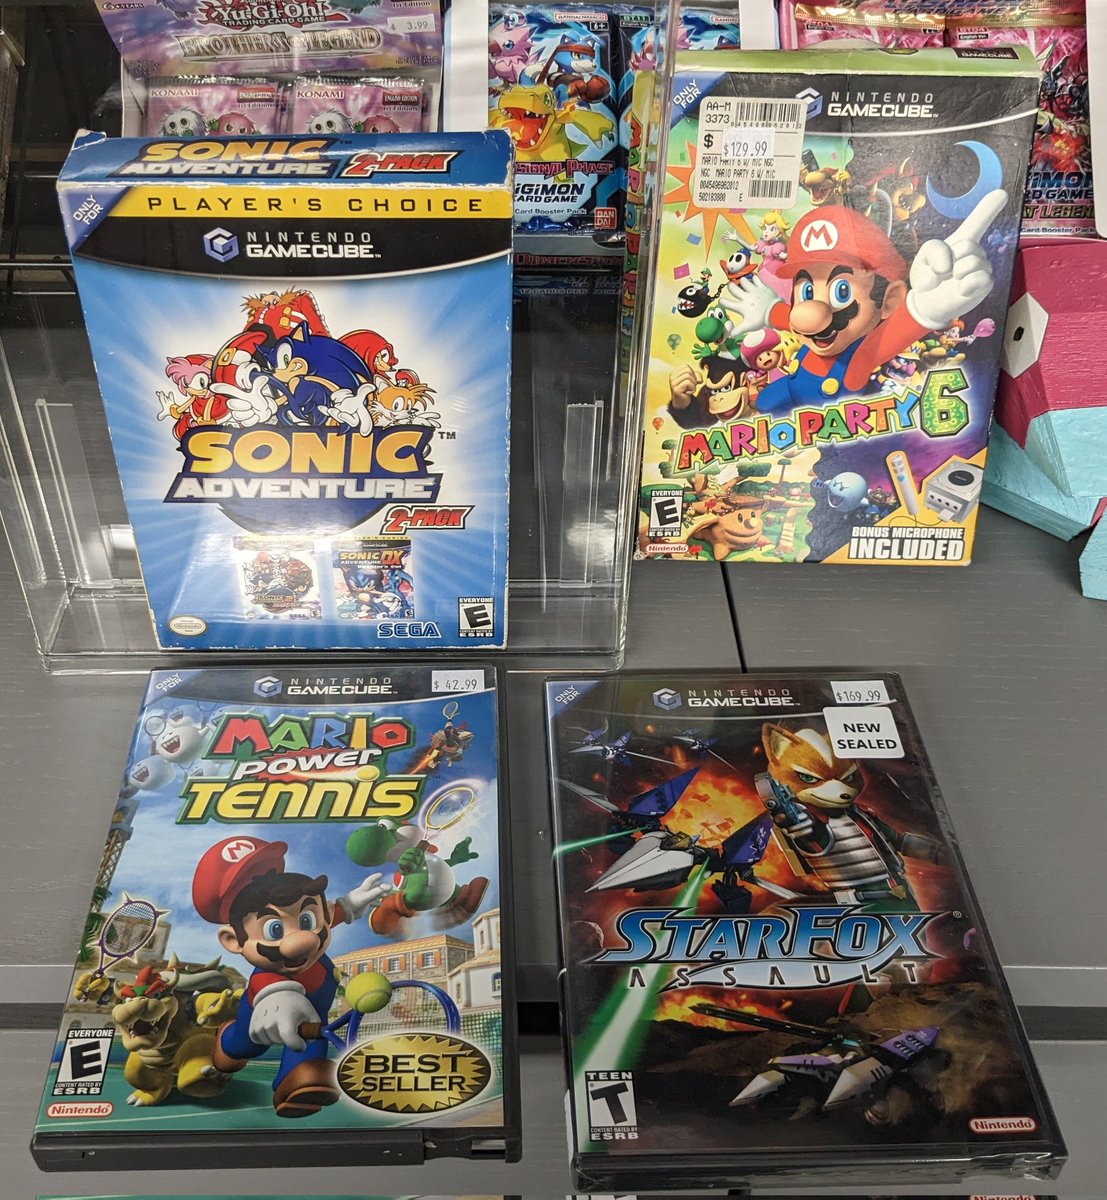 Along with that Sonic 2-pack, we received some stellar #Gamecube games.

#videogames #gamecollecting #retrogaming